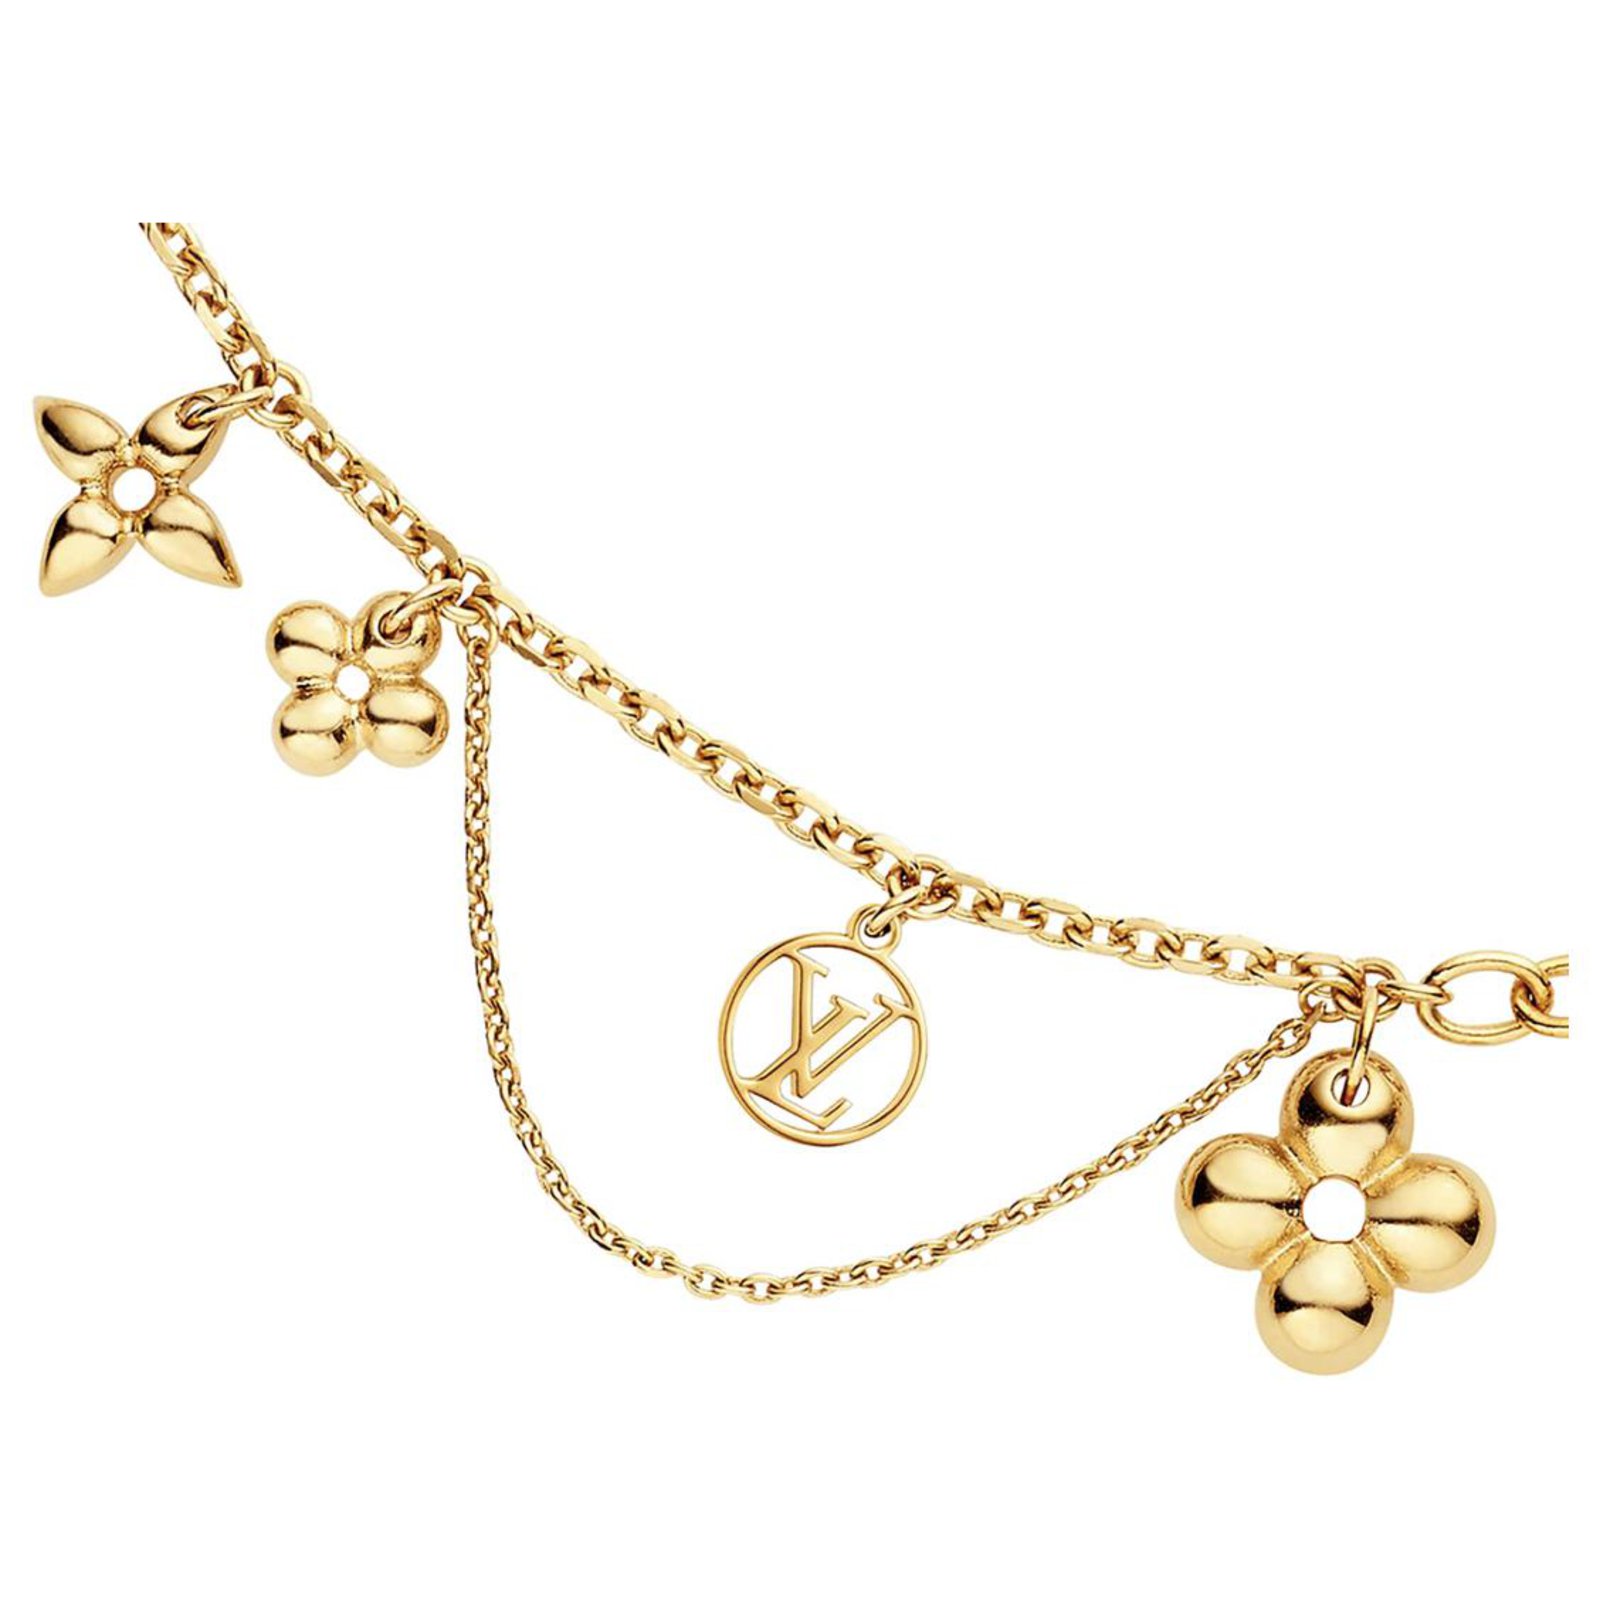 JEWELRY NEW ARRIVAL - LV GARDEN LOUISE GOLD NECKLACE – Sneakbag